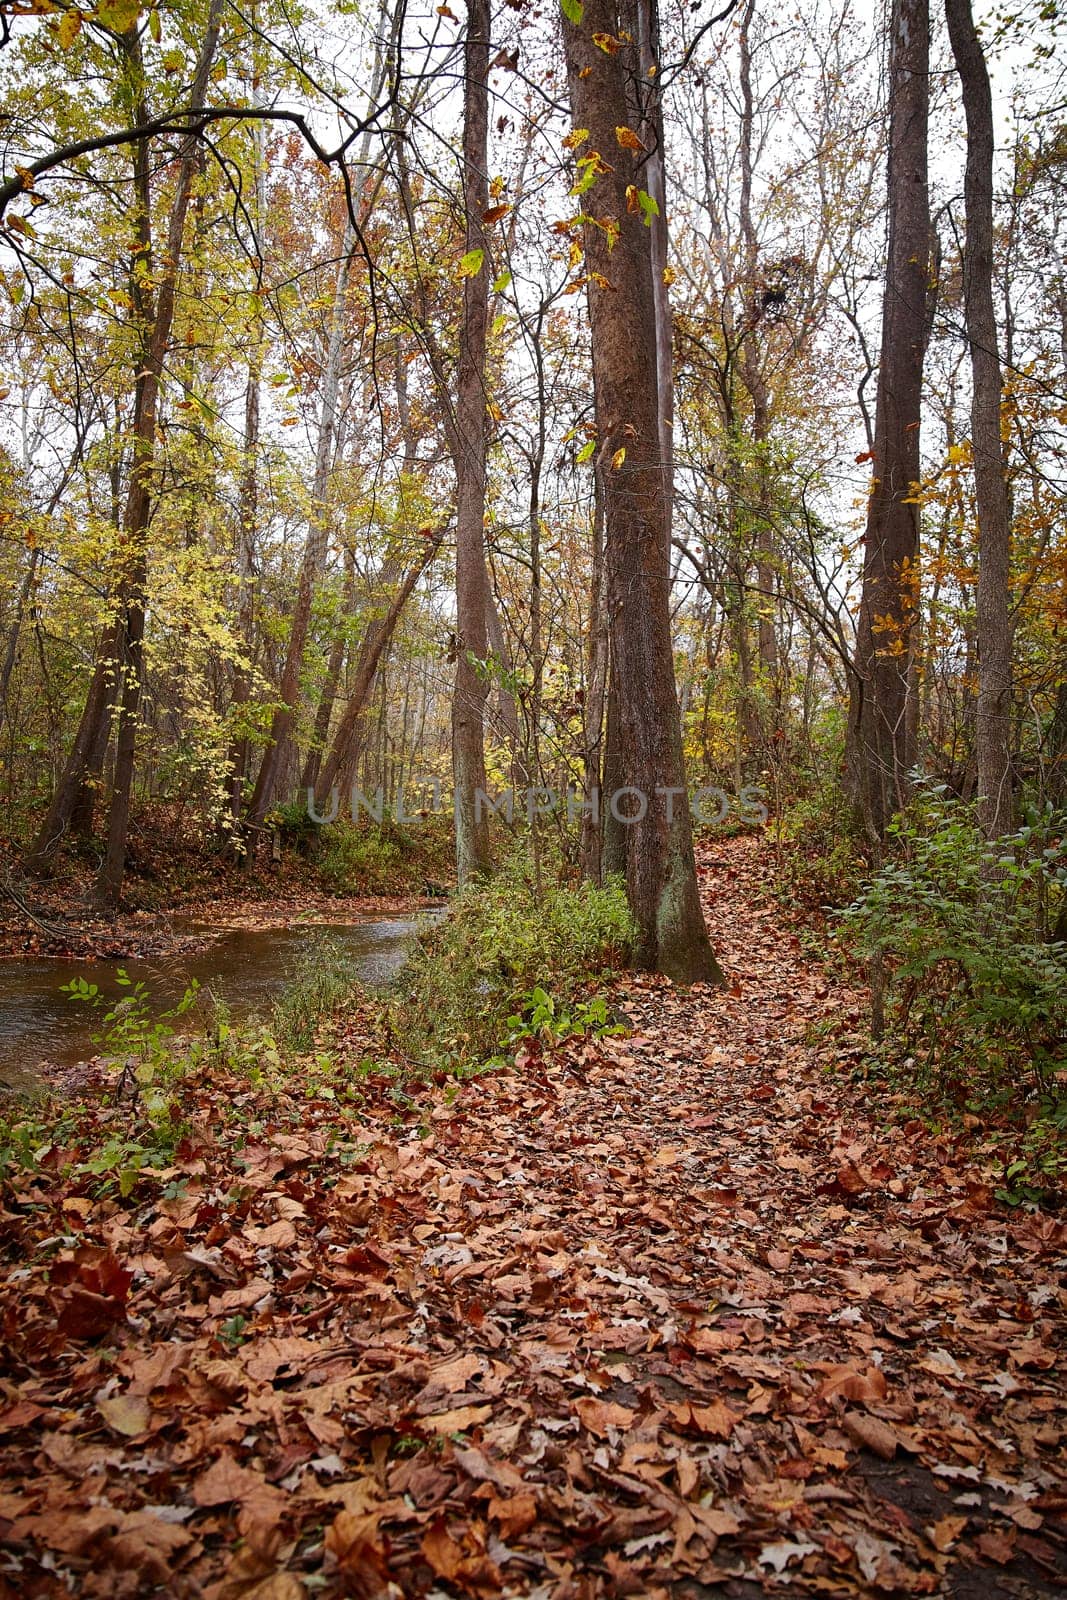 Autumn Tranquility on Leaf-Strewn Path in Bicentennial Acres, Indiana by njproductions